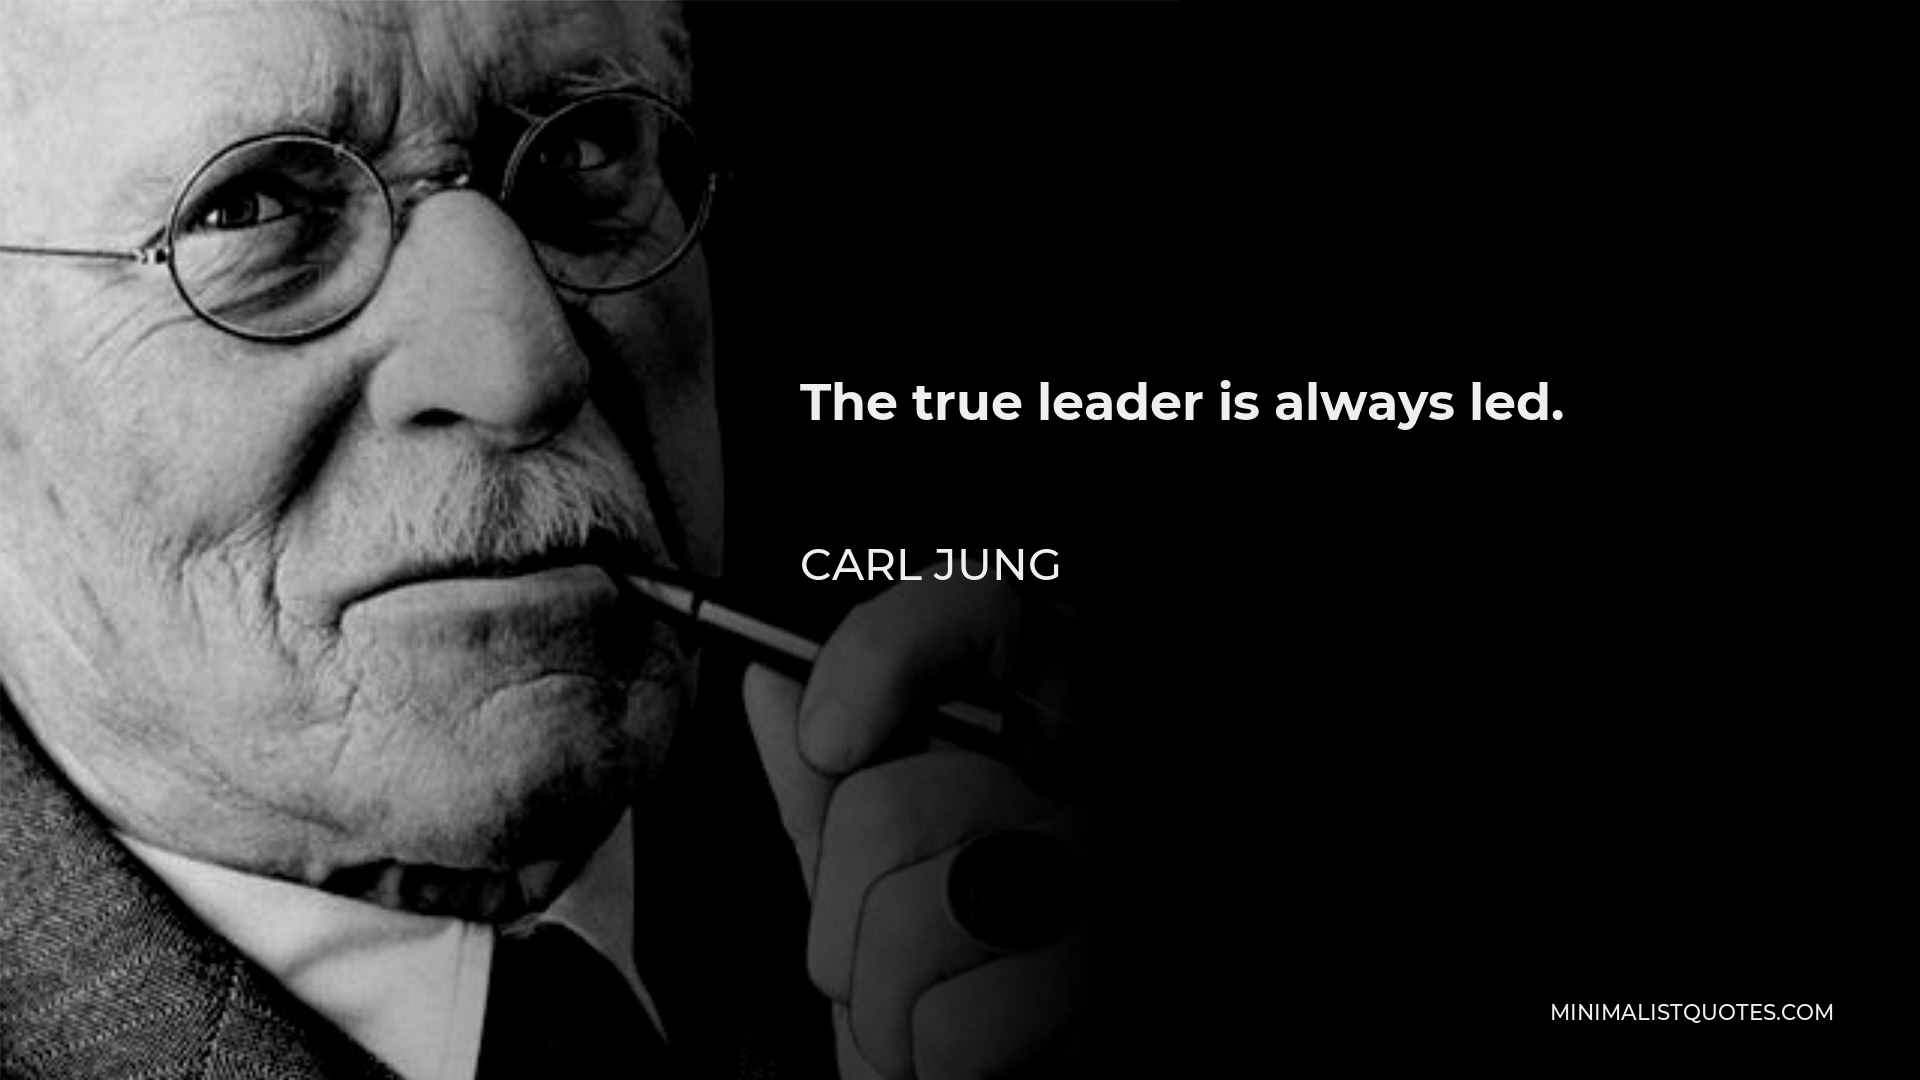 Carl Jung Quote - The true leader is always led.